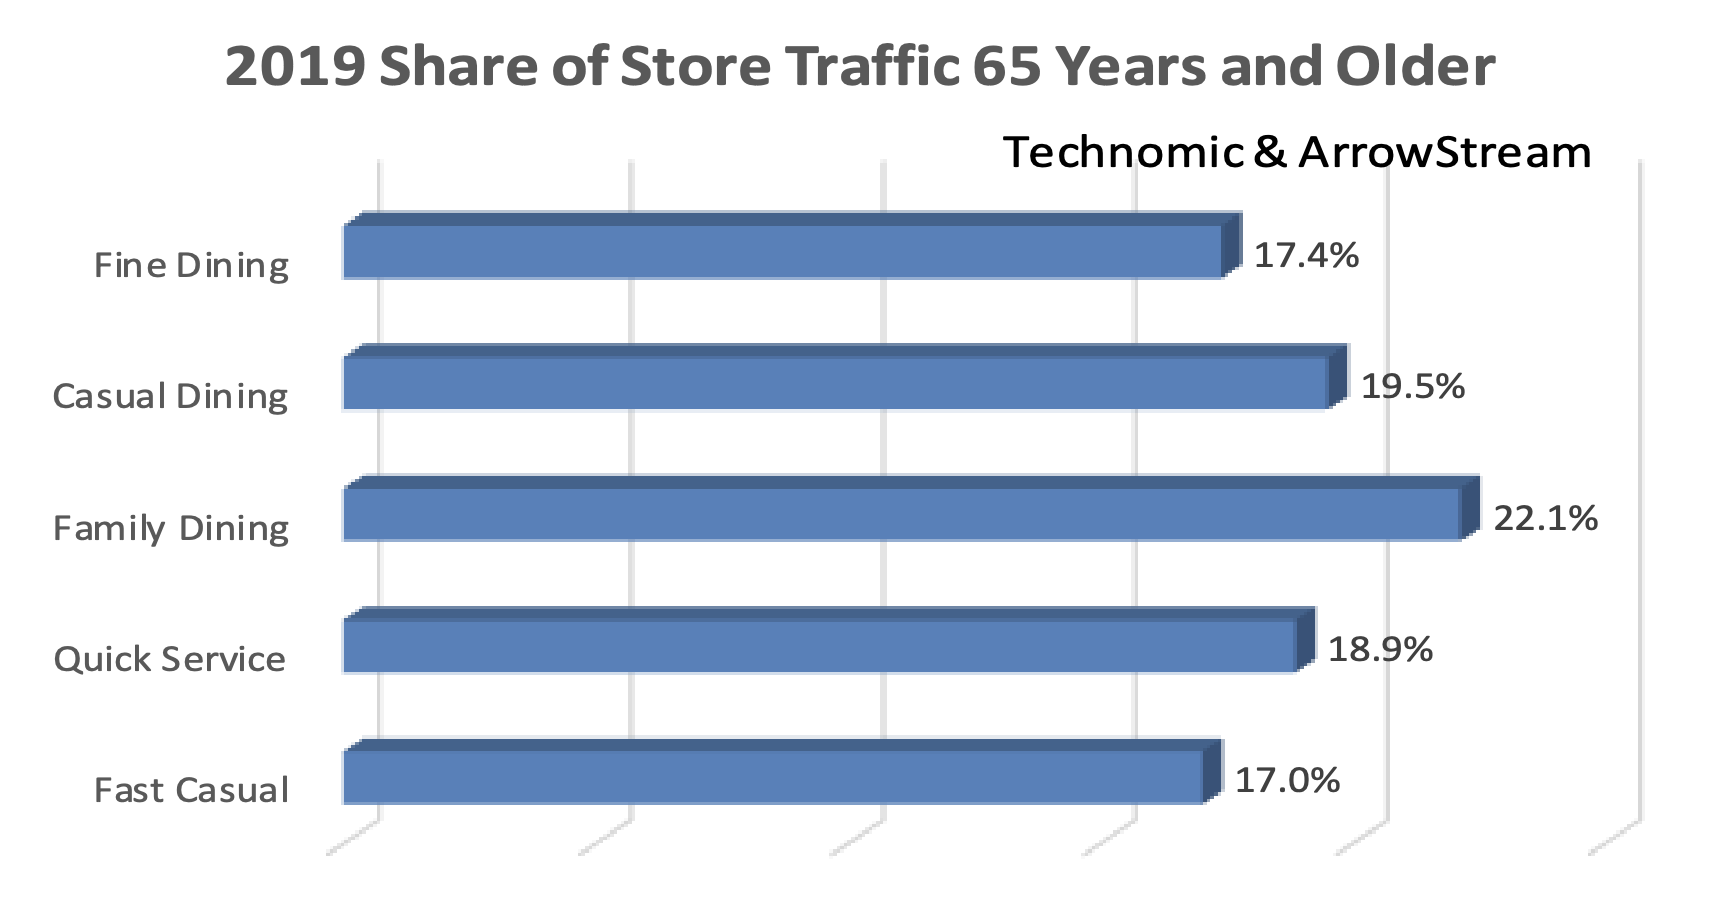 2019 Share of Store Traffic 65 Years and Older